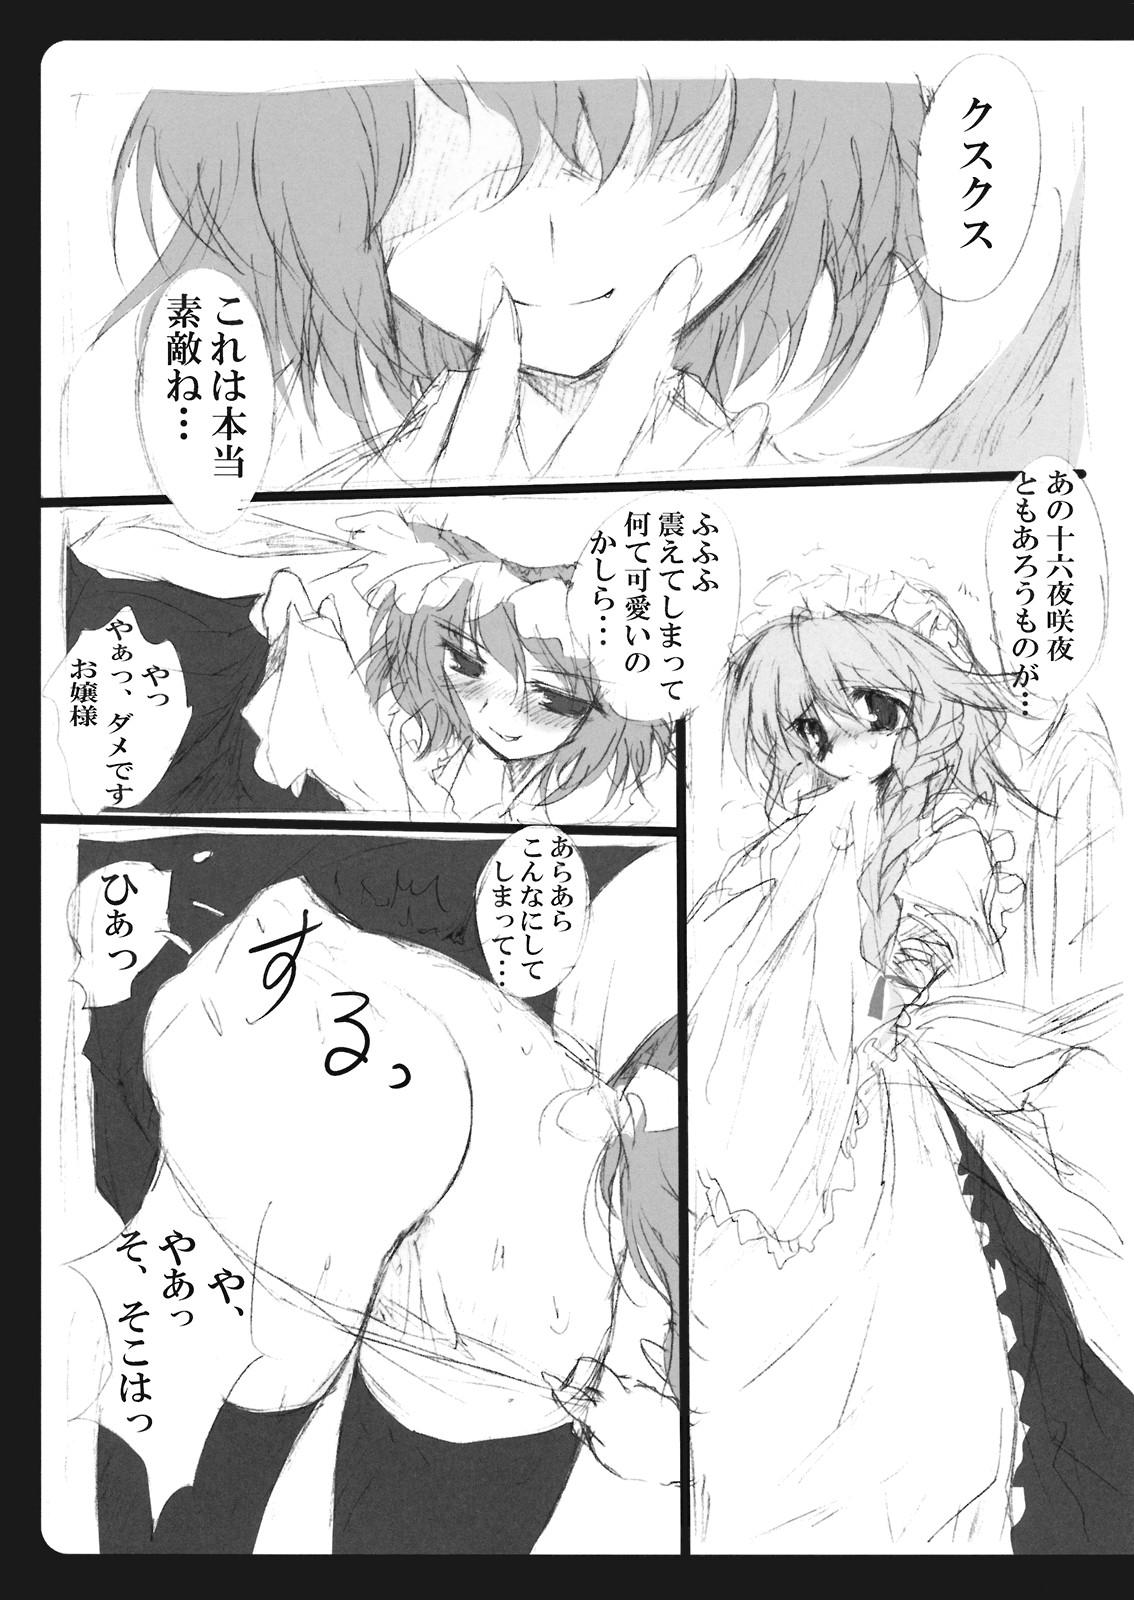 Boobs Gensoukyou Youkitan - Touhou project Panty - Page 6